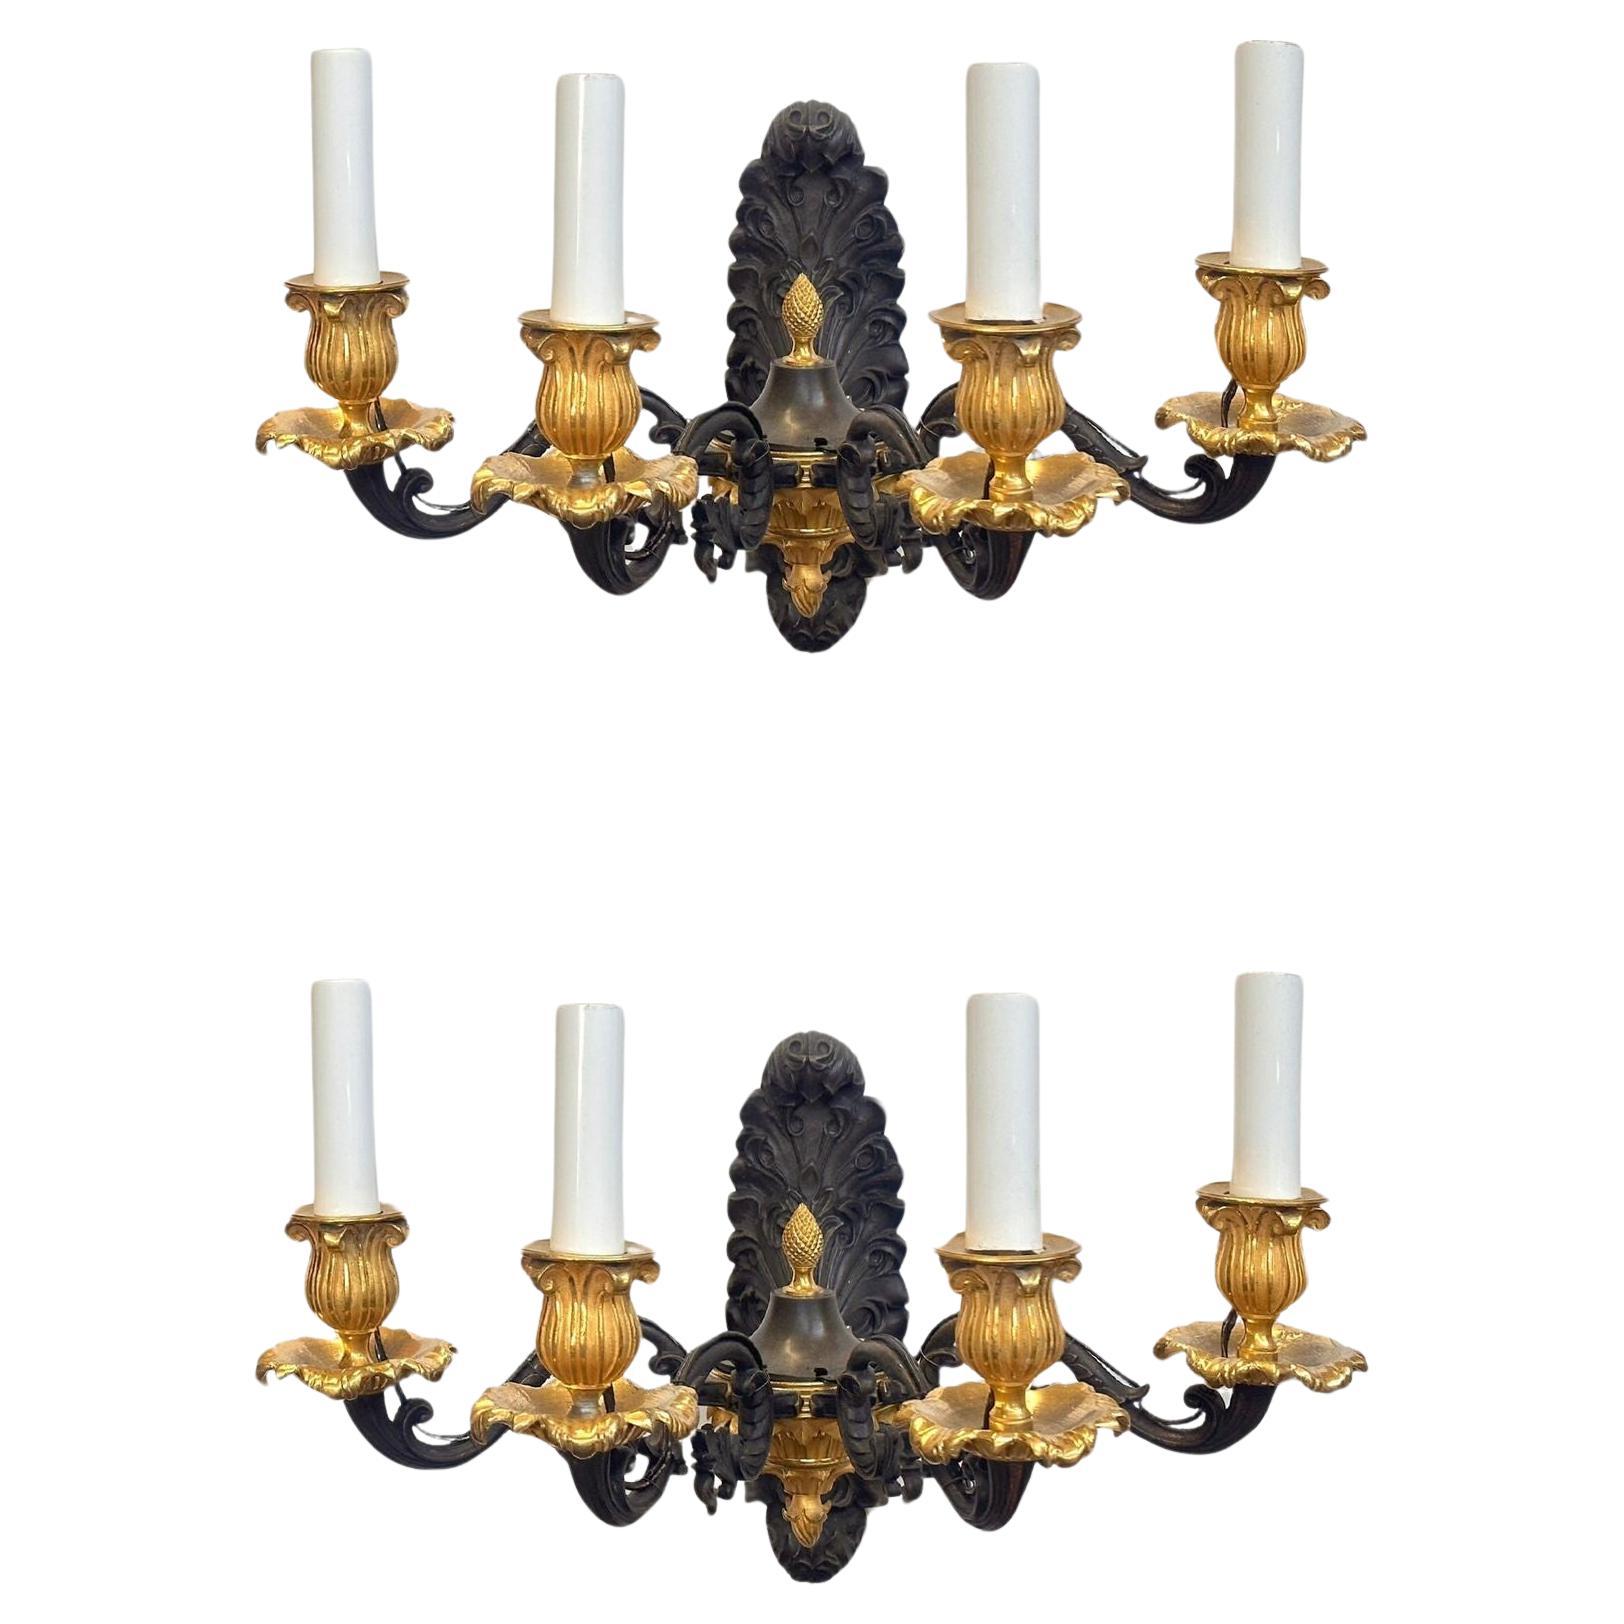 Pair of French Late 19th Century Empire-Style Sconces For Sale